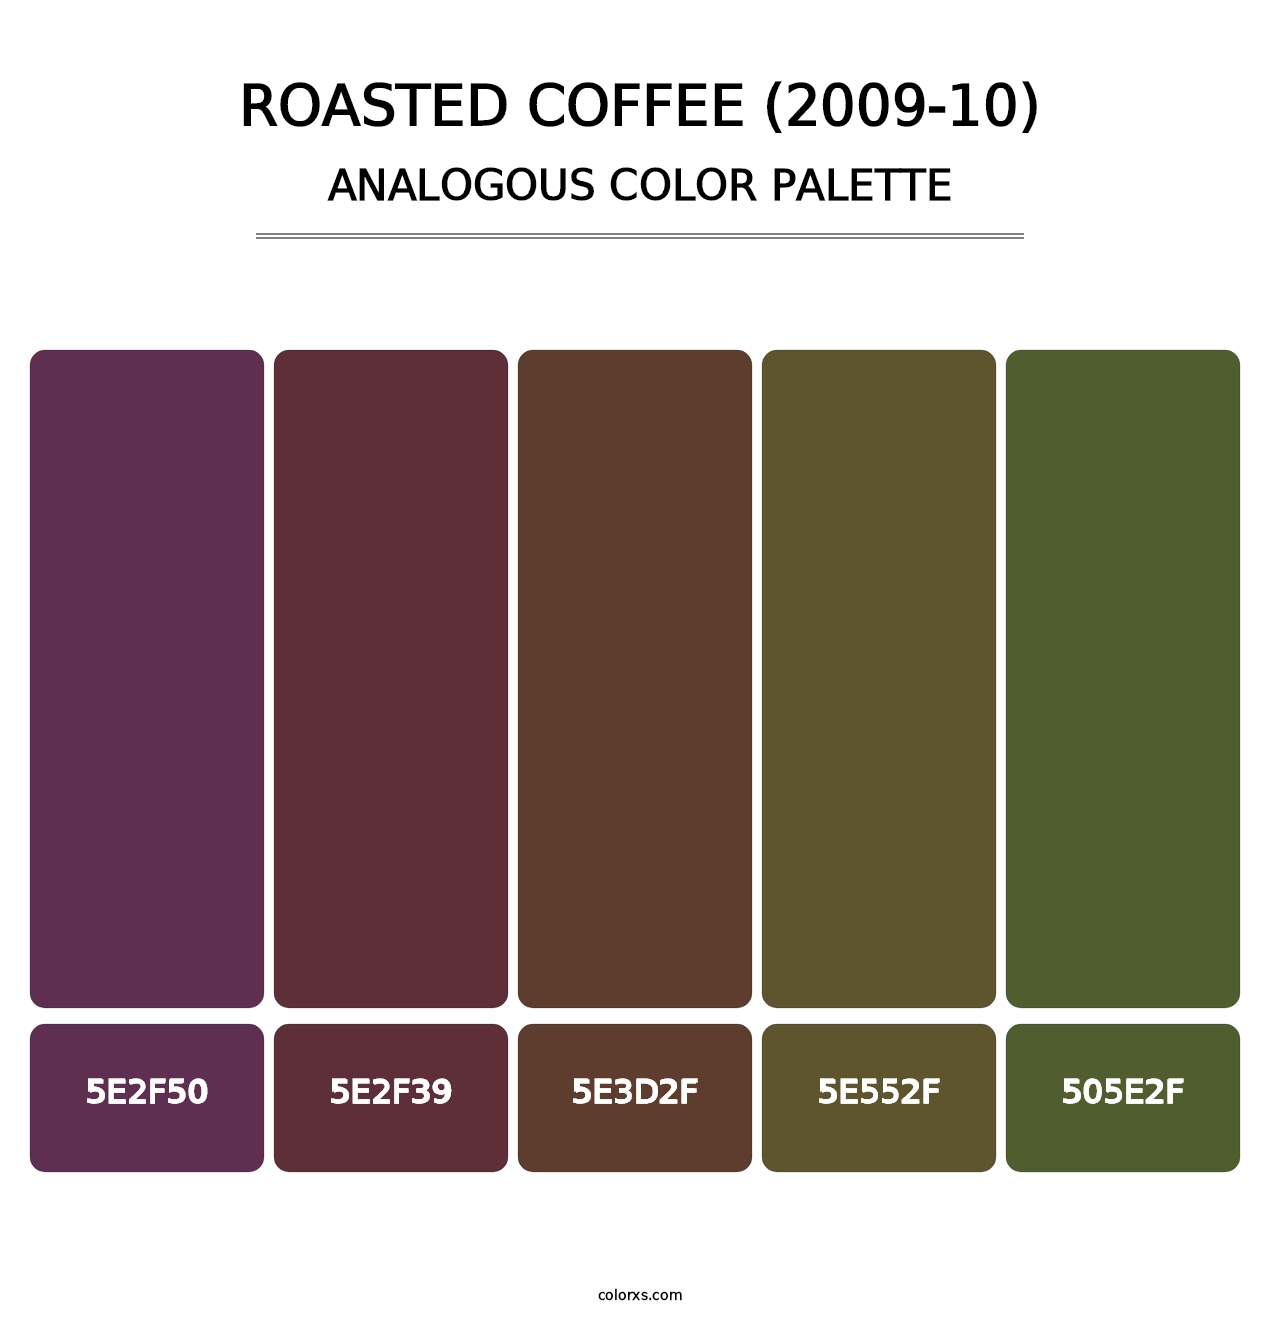 Roasted Coffee (2009-10) - Analogous Color Palette